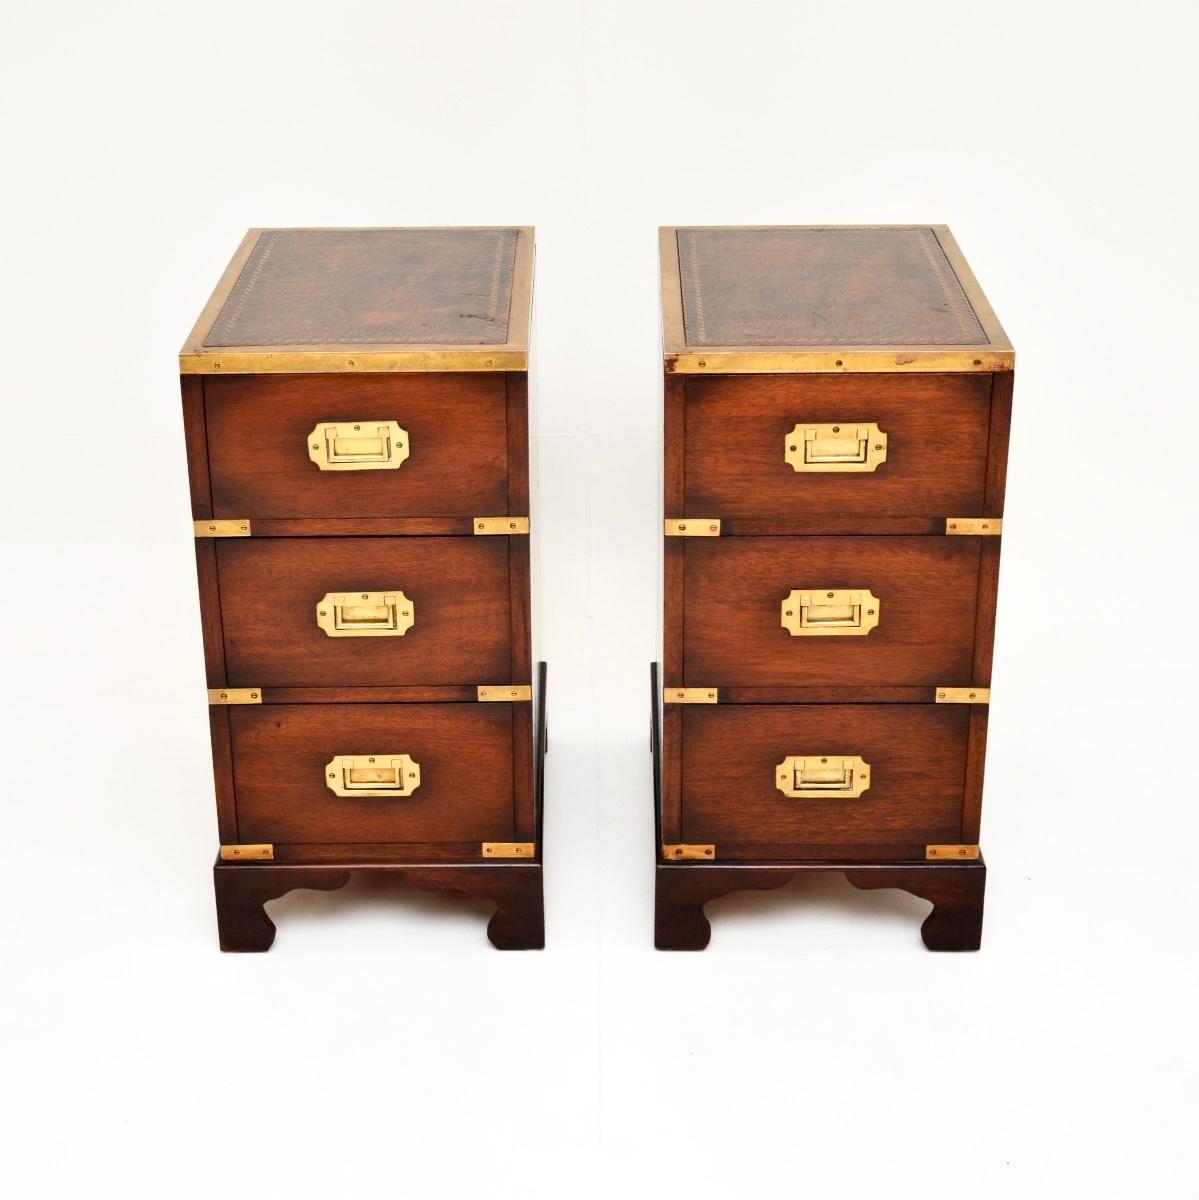 A smart and very well made pair of antique military campaign style bedside chests. They were made in England, and date from around the 1930’s.

The quality is outstanding, they are beautifully designed and are a great size. The wood has a gorgeous